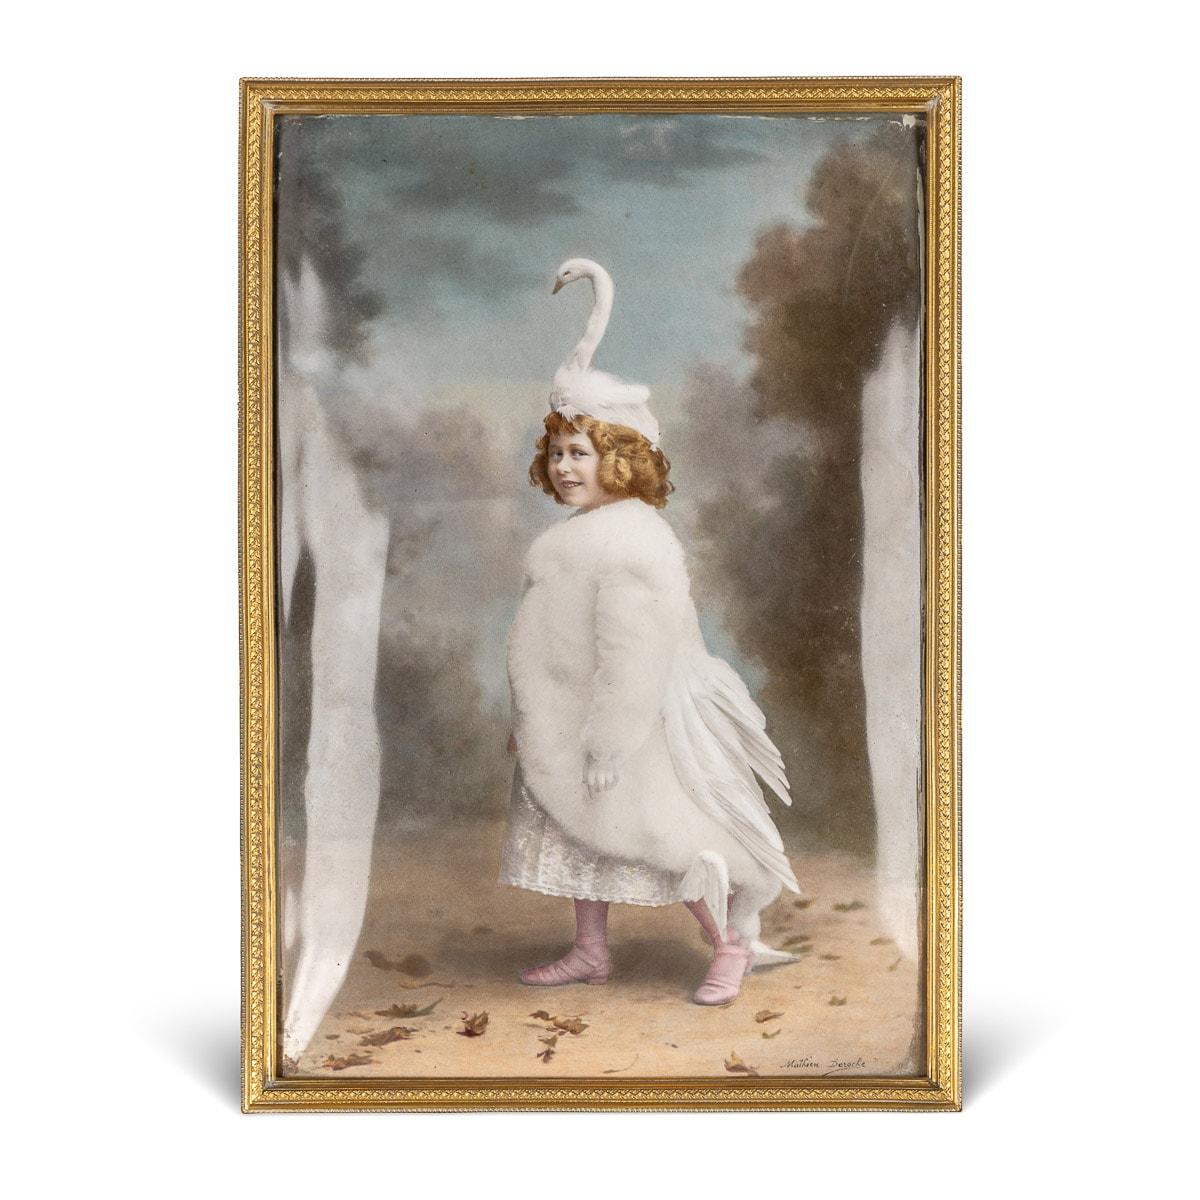 Antique late 19th Century French very unusual enamel plaque of a young lady in a white fur coat with swan plumage and a hat mounted with a swans head.

CONDITION
In Excellent Condition - no damage, just general wear.

SIZE
Height: 23cm
Width: